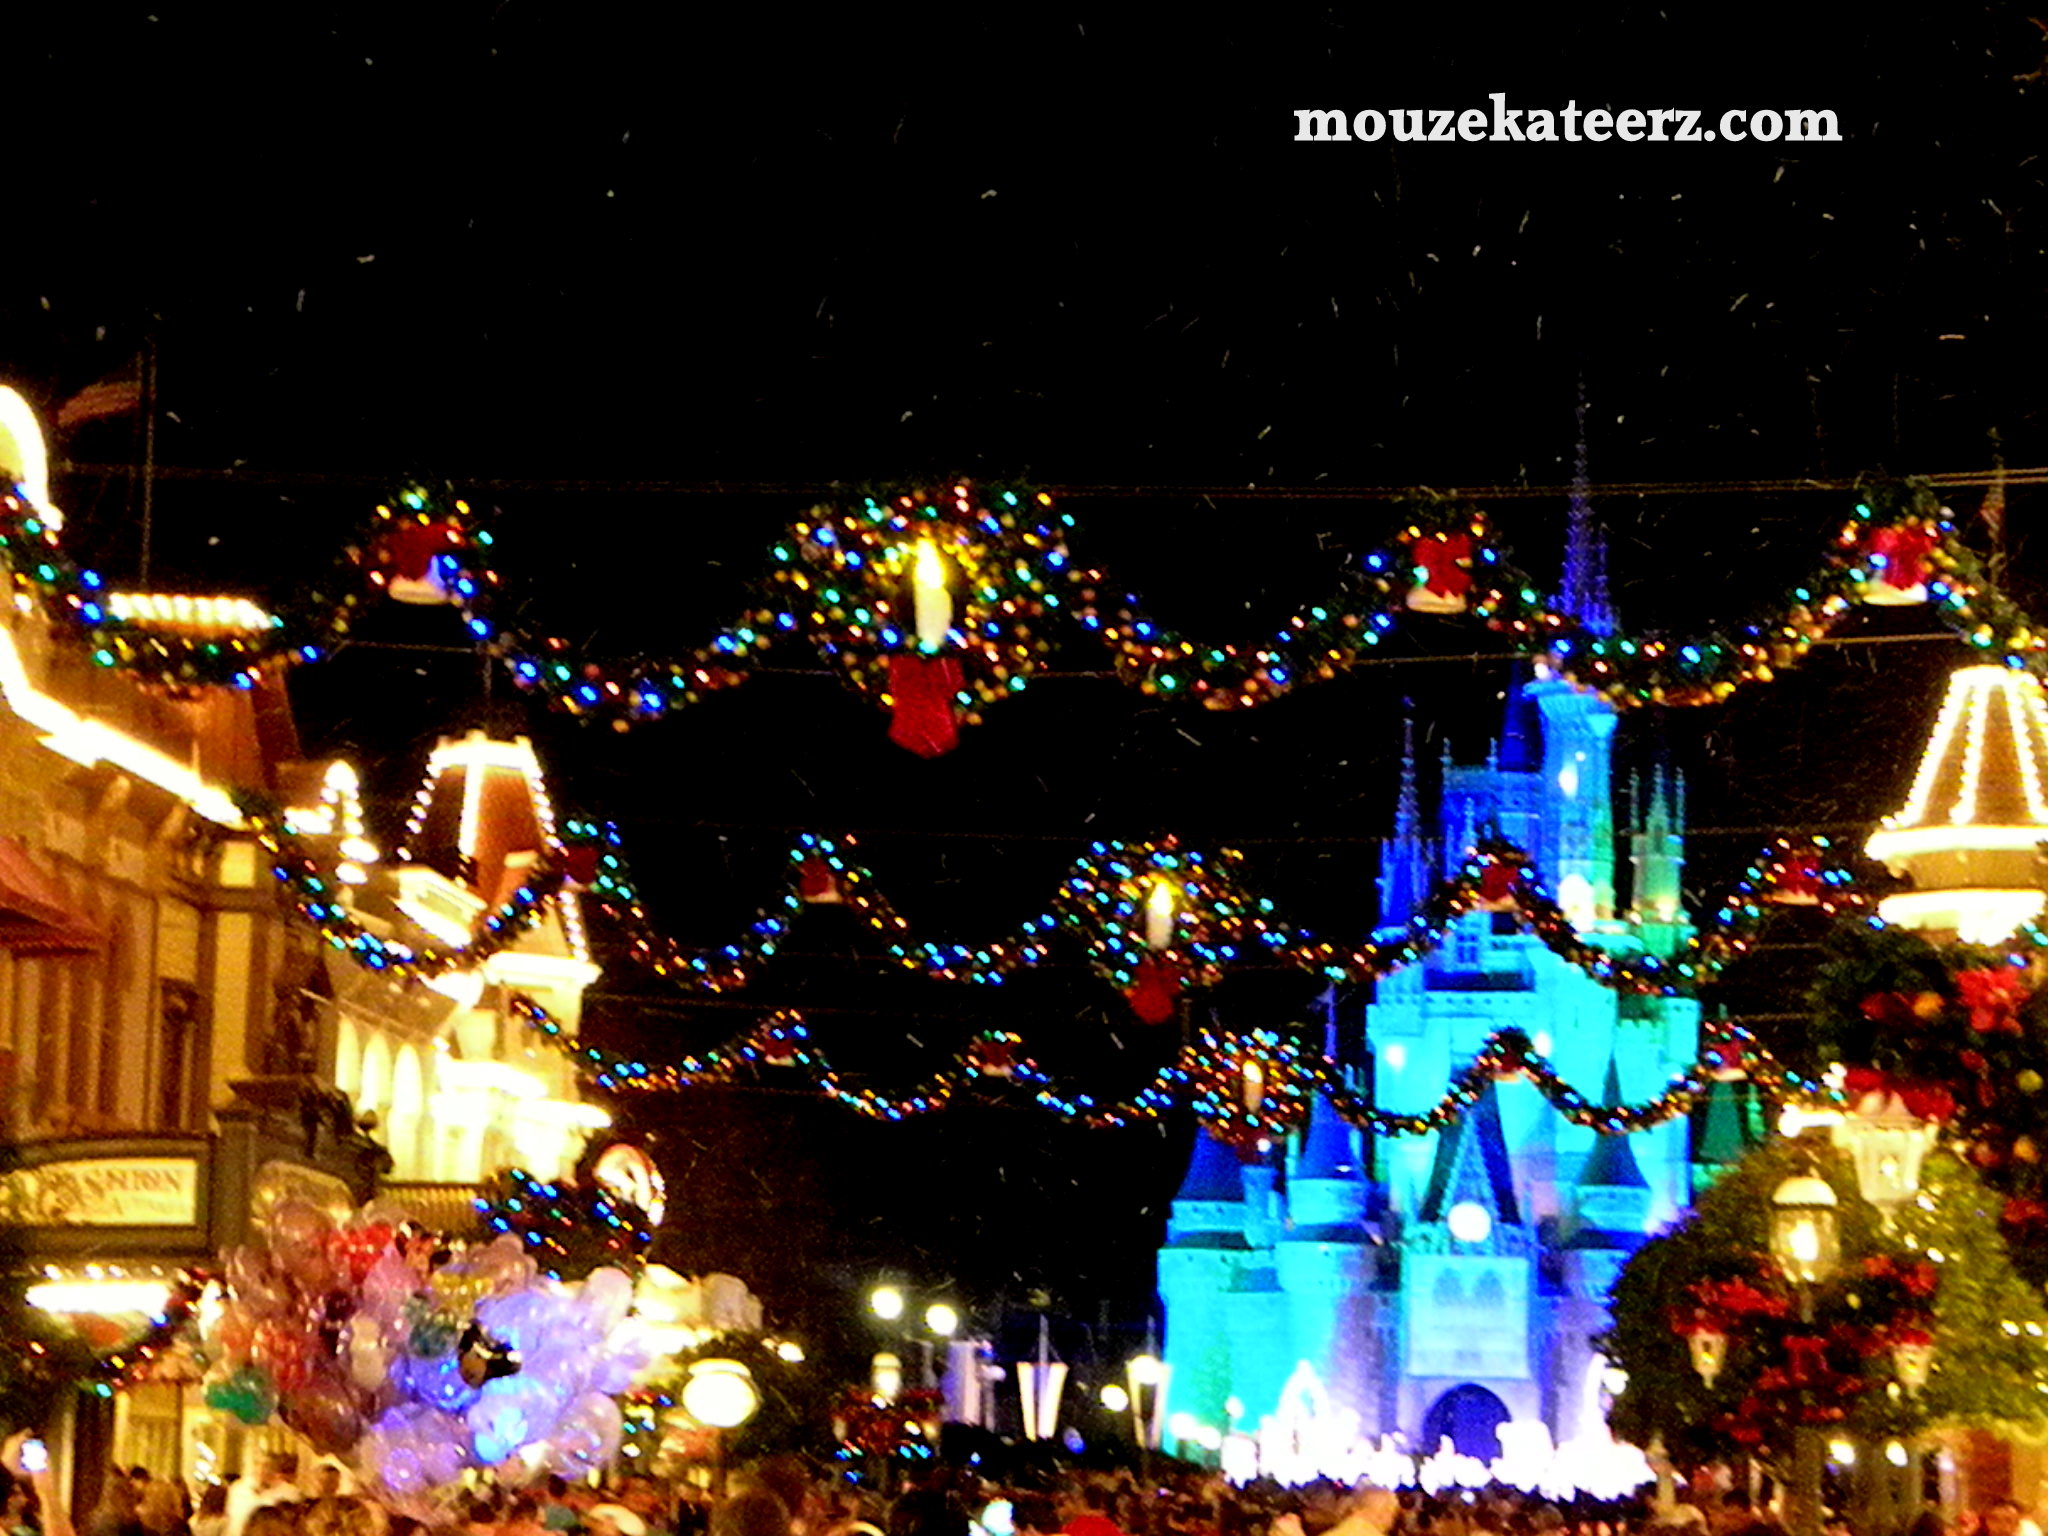 Christmas Holidays at Walt Disney World: Are You Ready to Take on the Crowds?